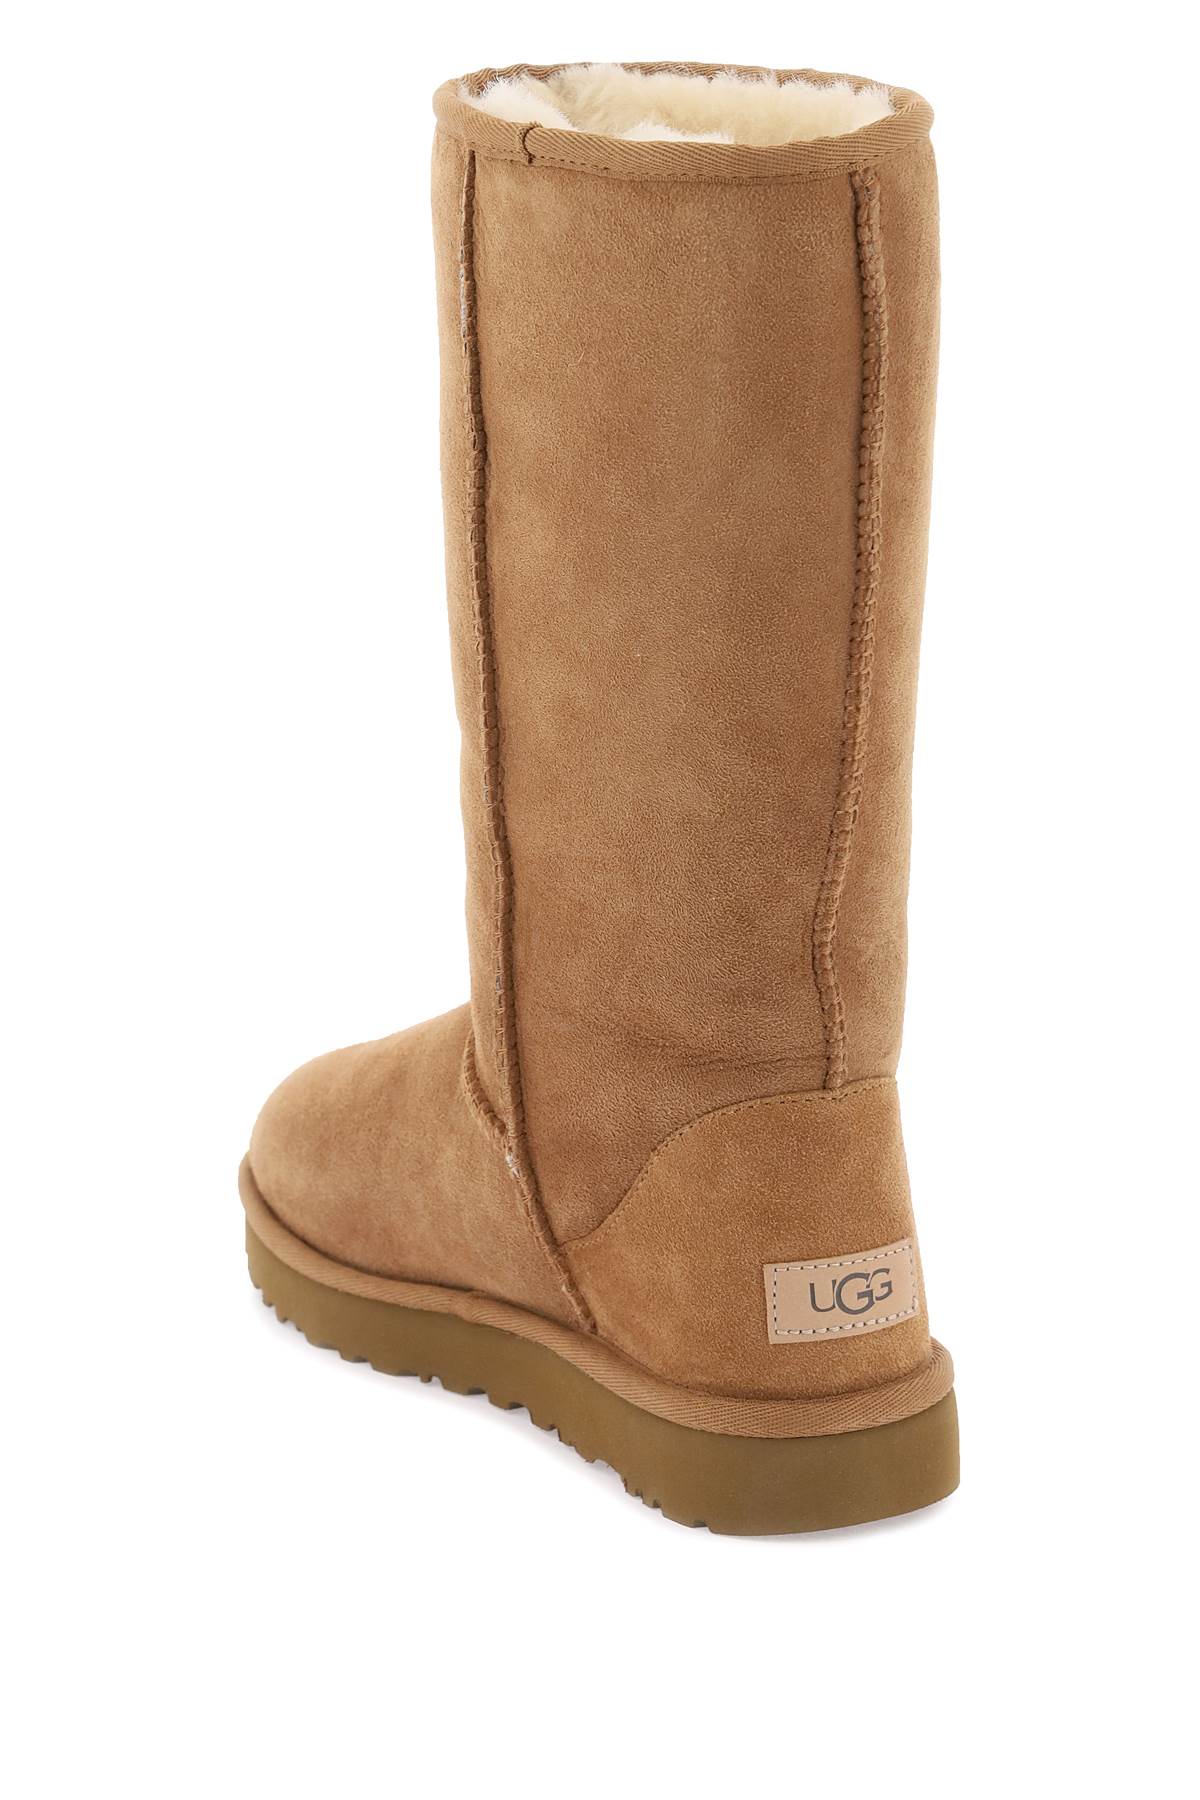 Shop Ugg Classic Tall Ii Boots In Chestnut (beige)